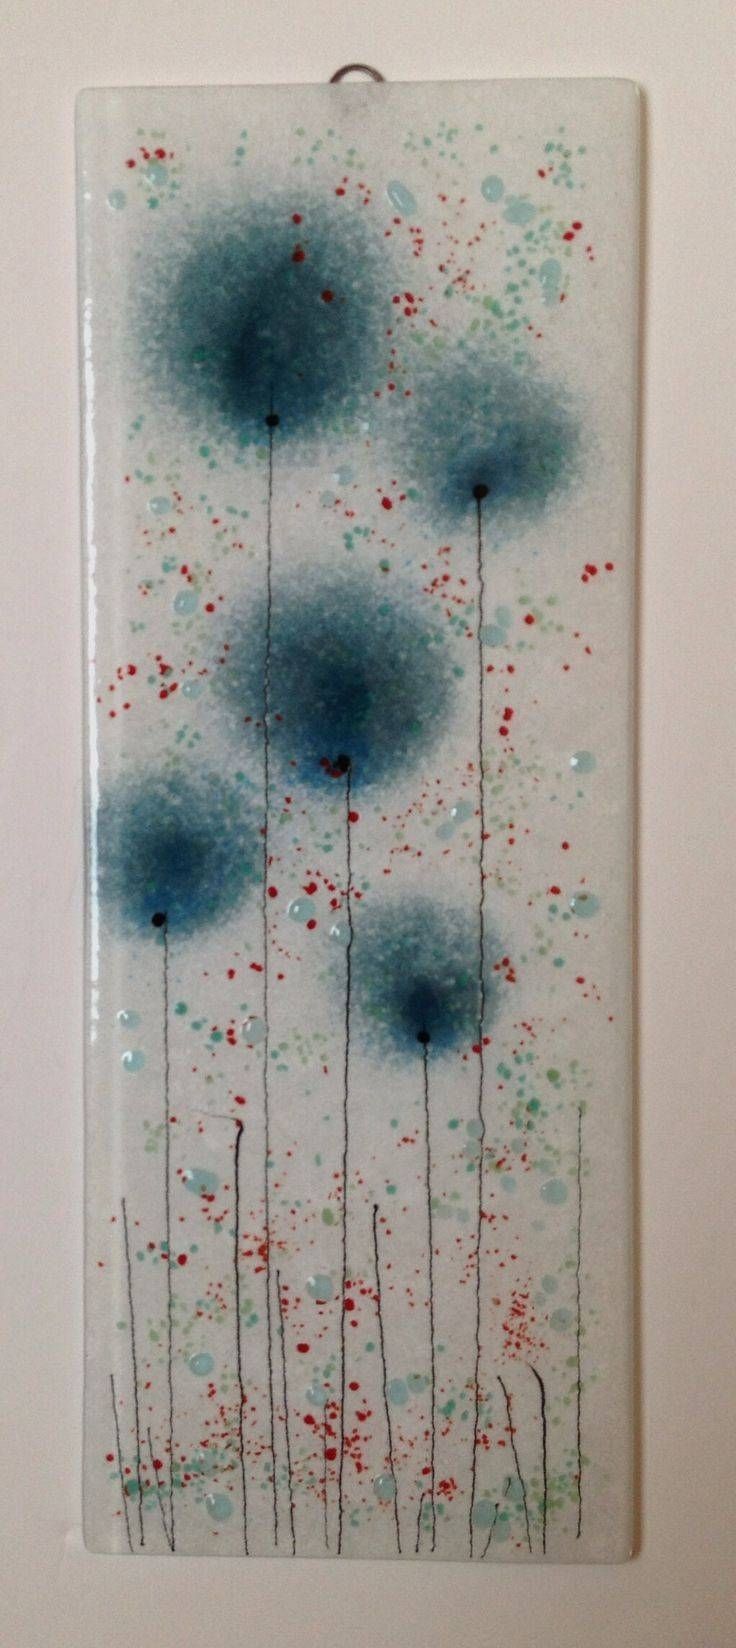 25+ Unique Glass Wall Art Ideas On Pinterest | Fused Glass Art With 2018 Fused Glass Wall Art Hanging (View 4 of 25)